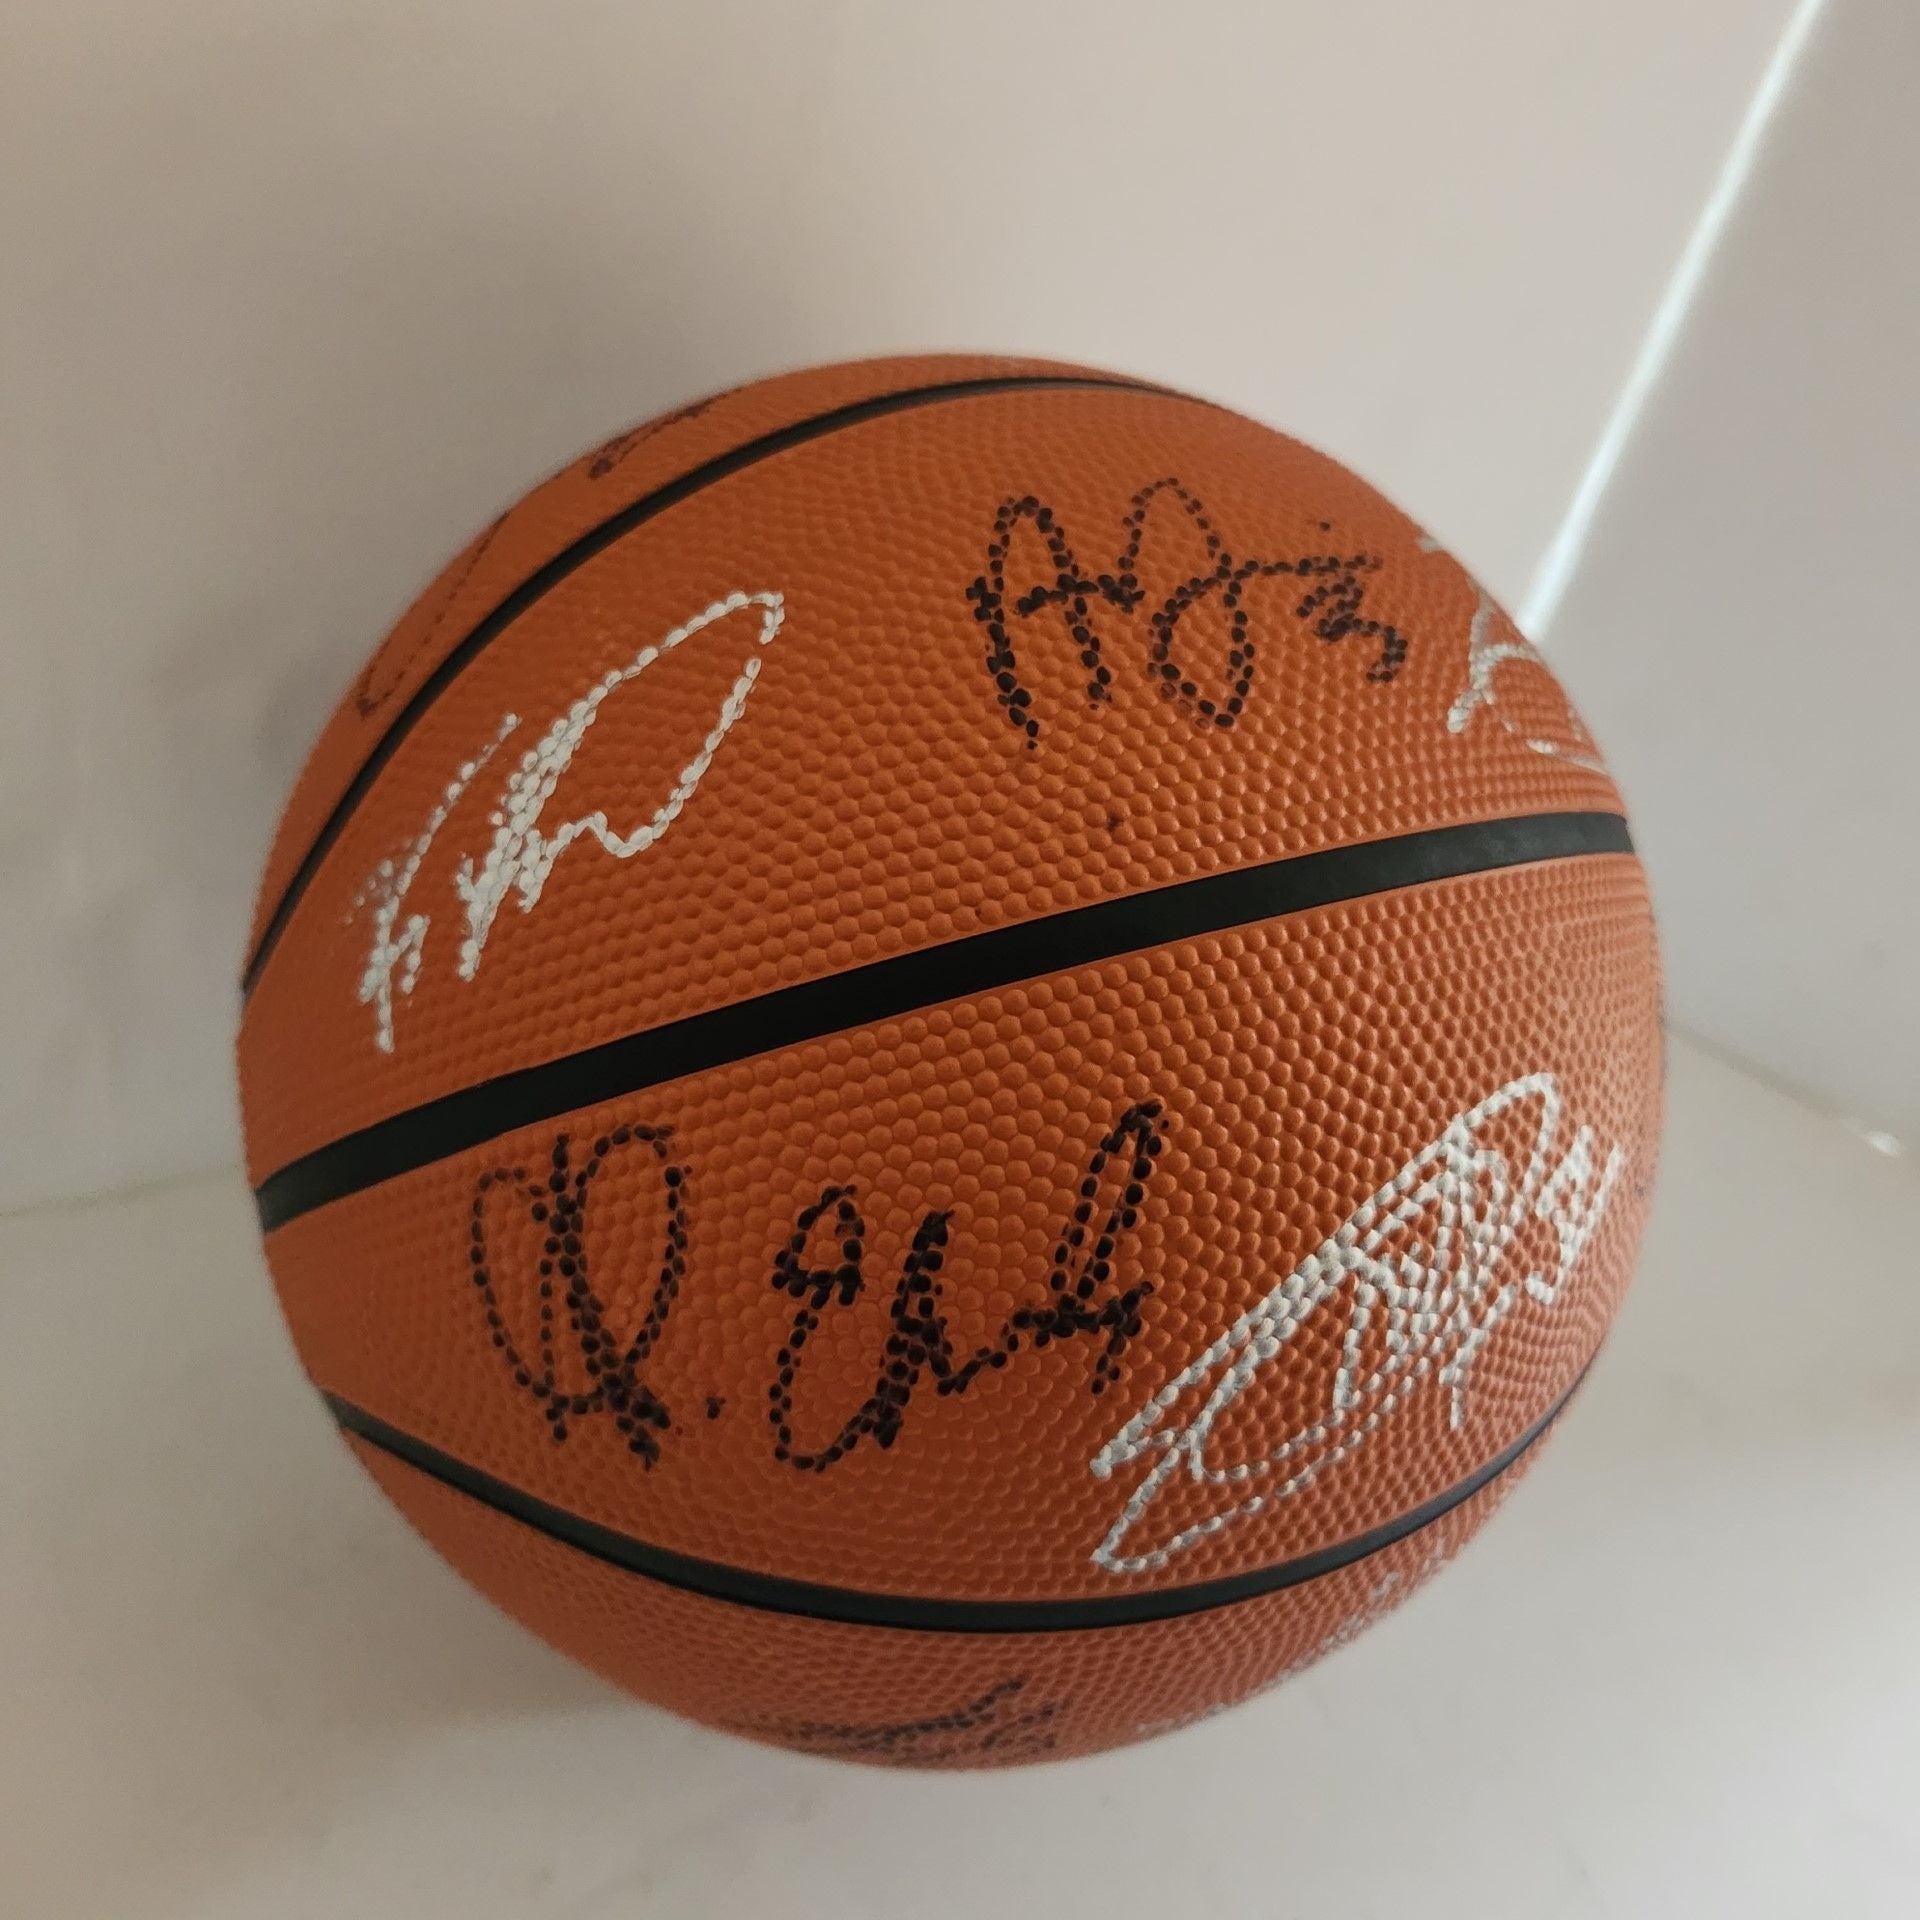 LeBron James, Nikola Jokic, Luka Doncic, Joel Embiid Steph Curry signed basketball with proof free display case